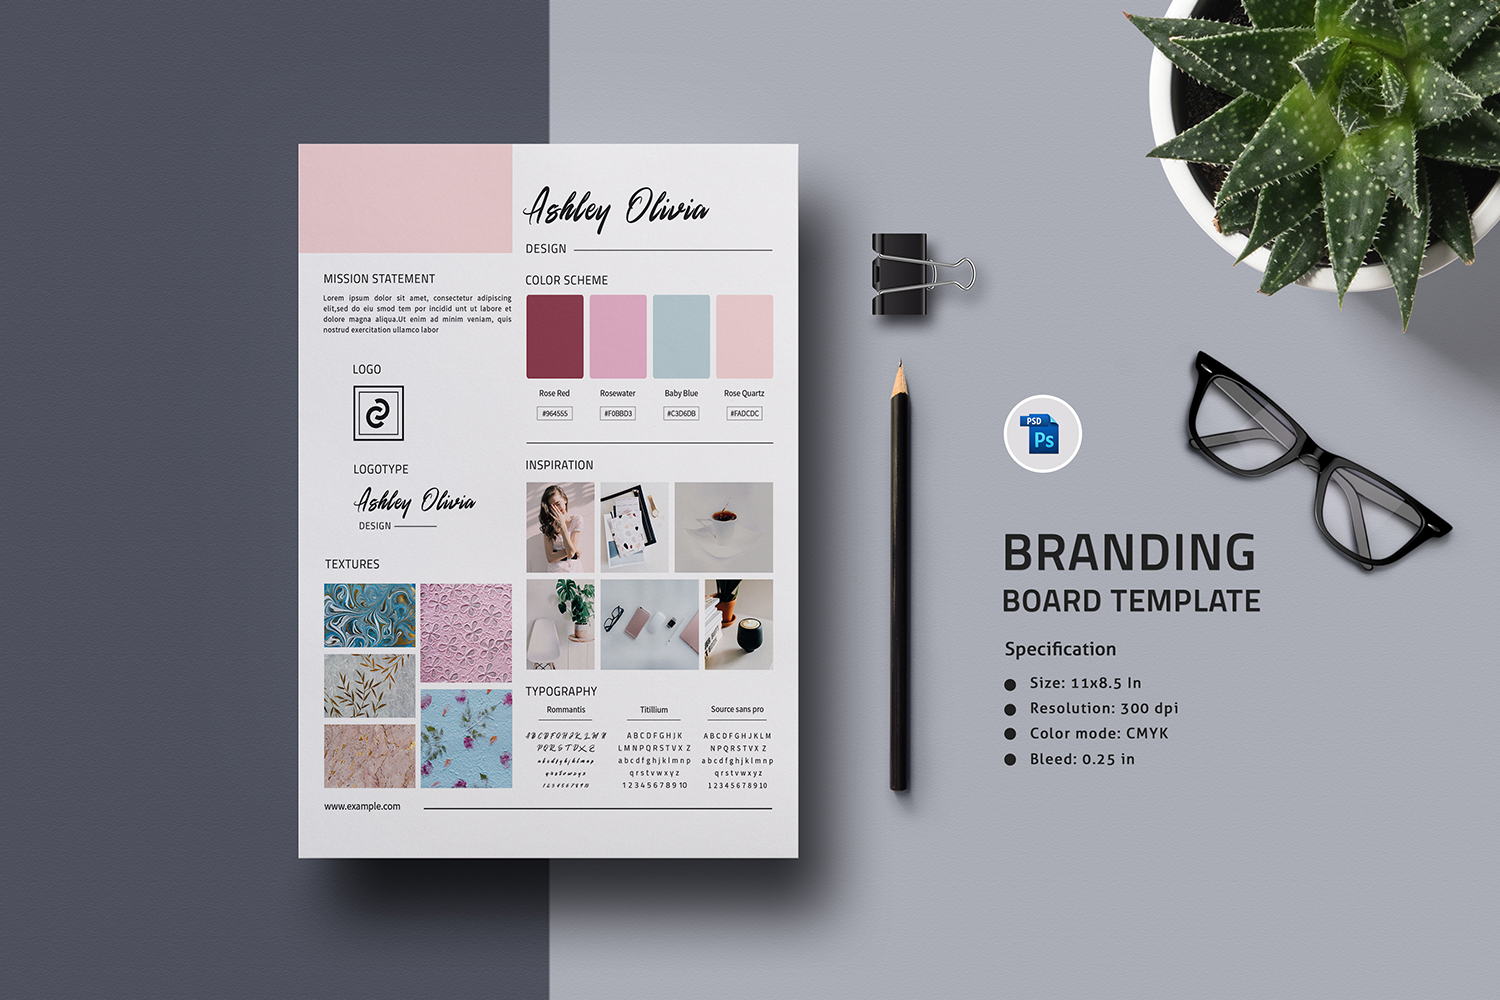 Branding Board Template. Photoshop and Canva